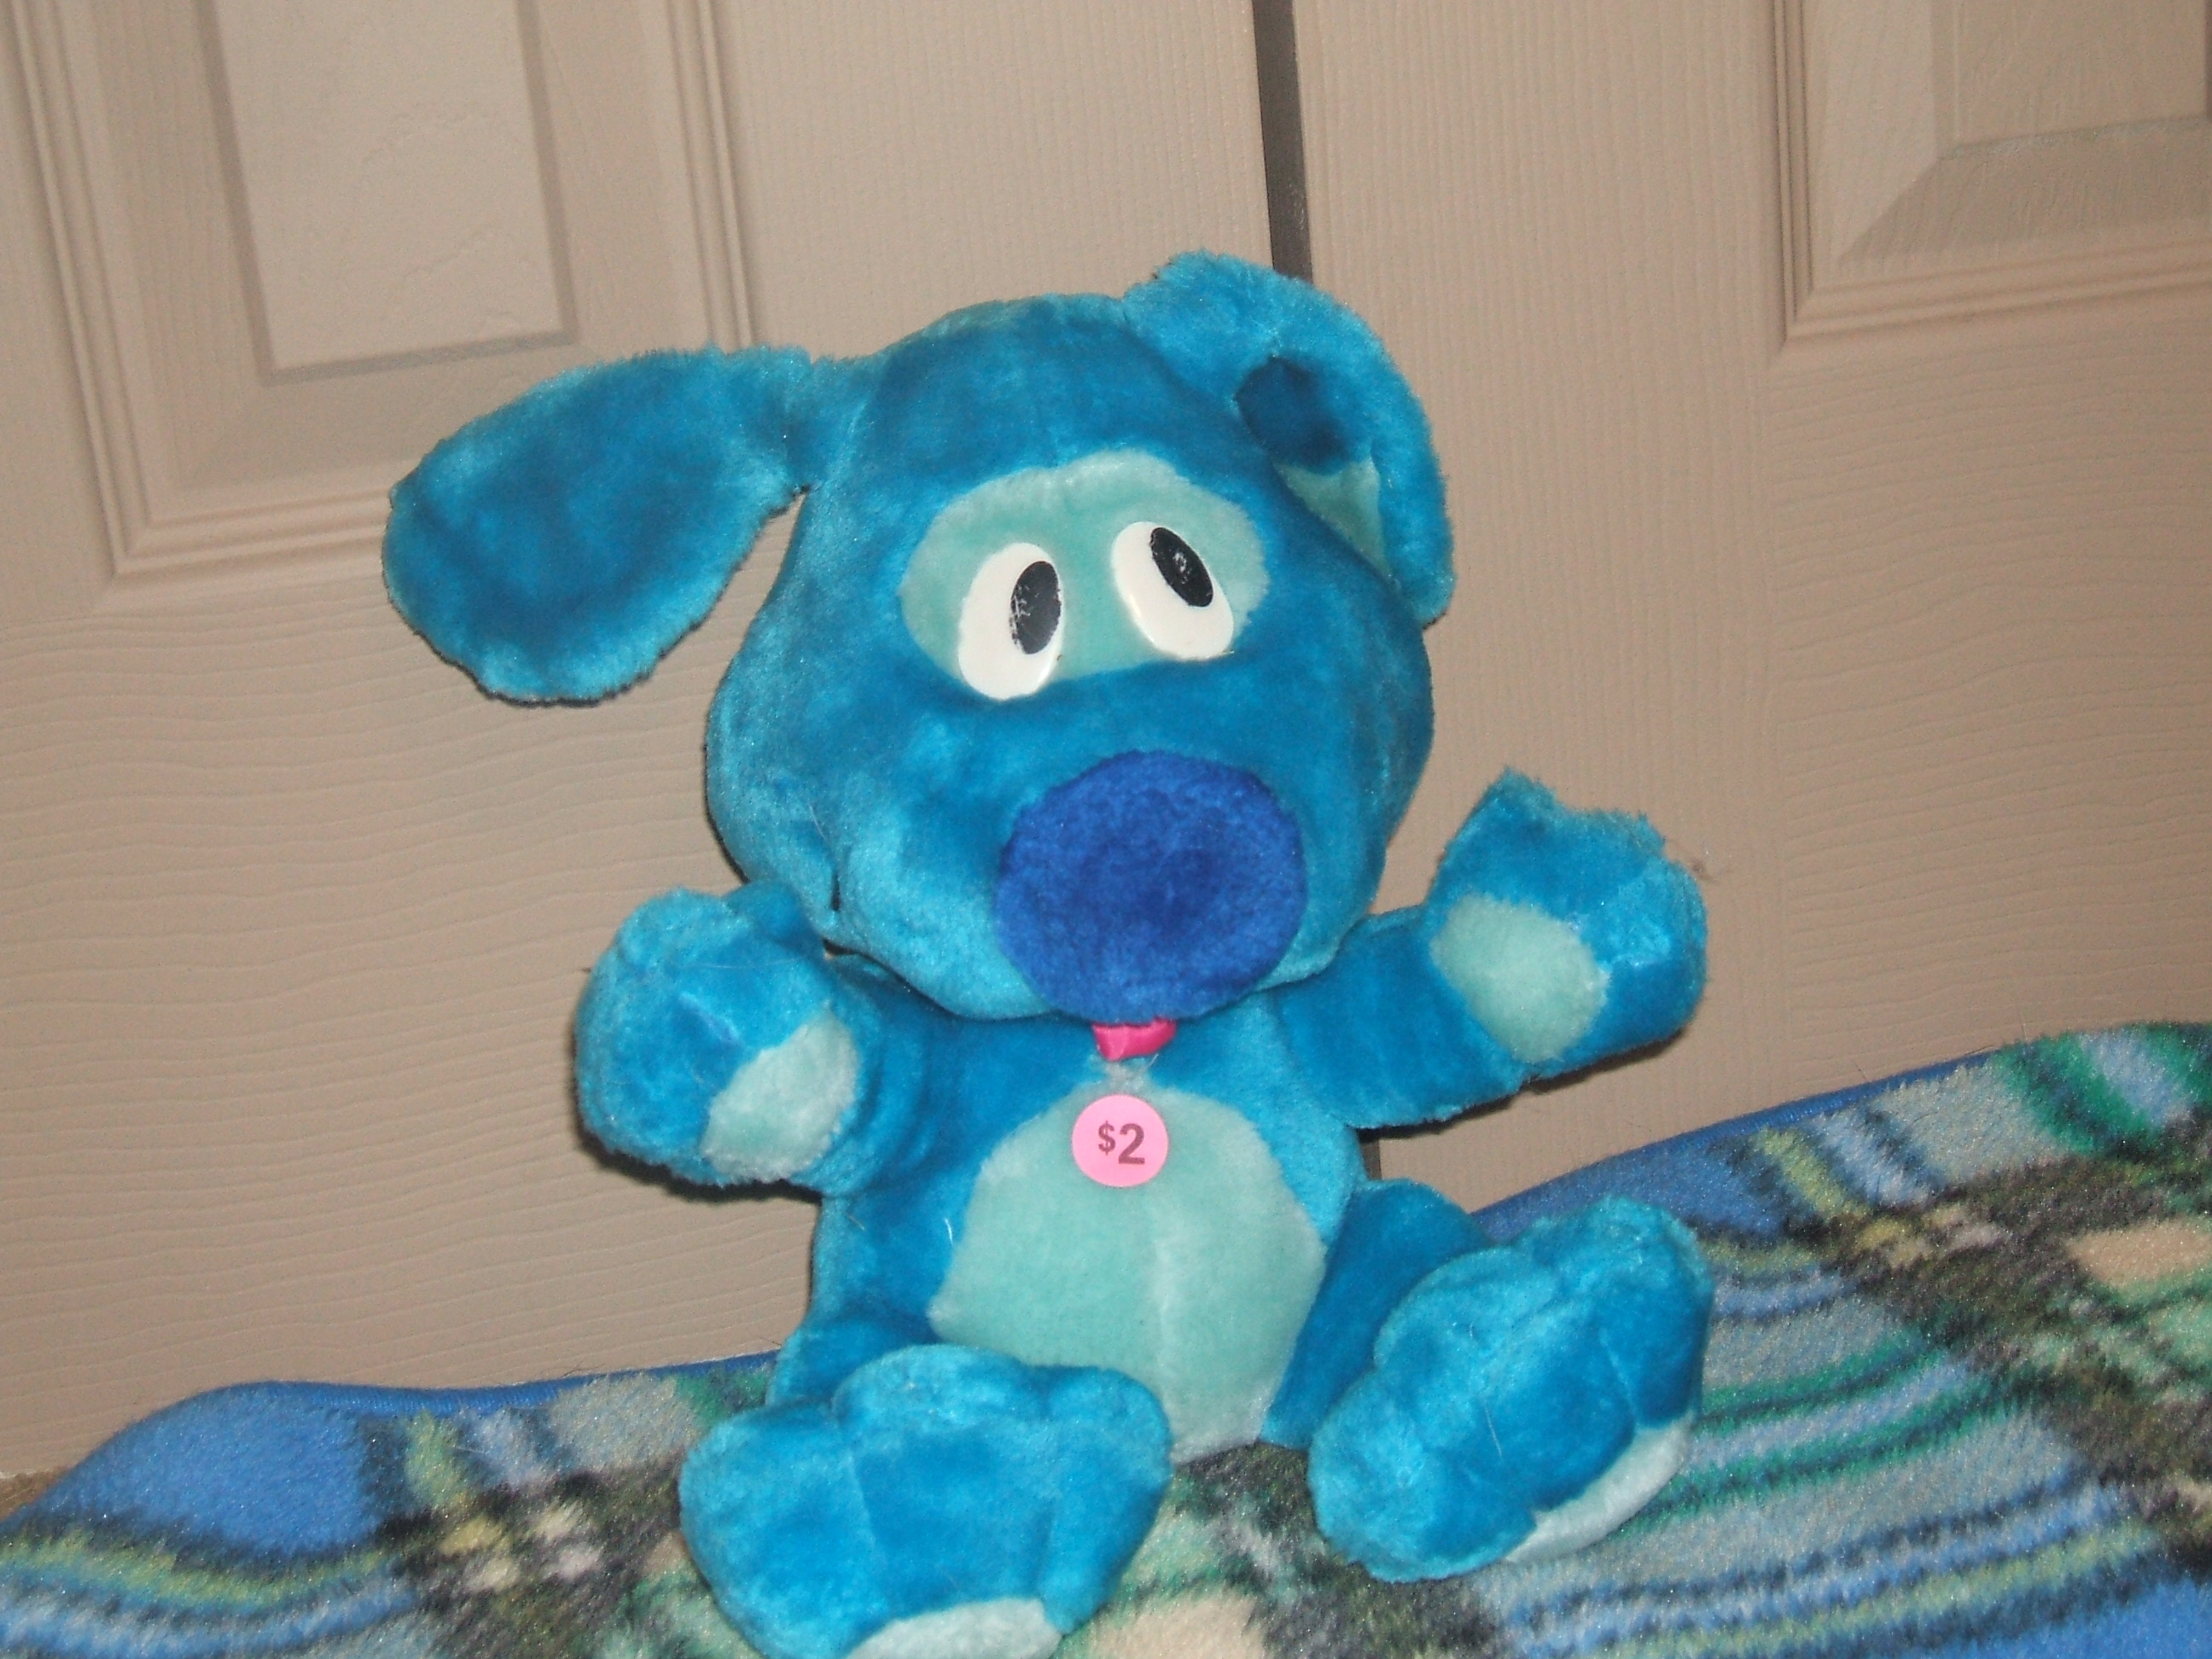 GREAT BUY! BABY BLUE PUPPY FOR $2.00